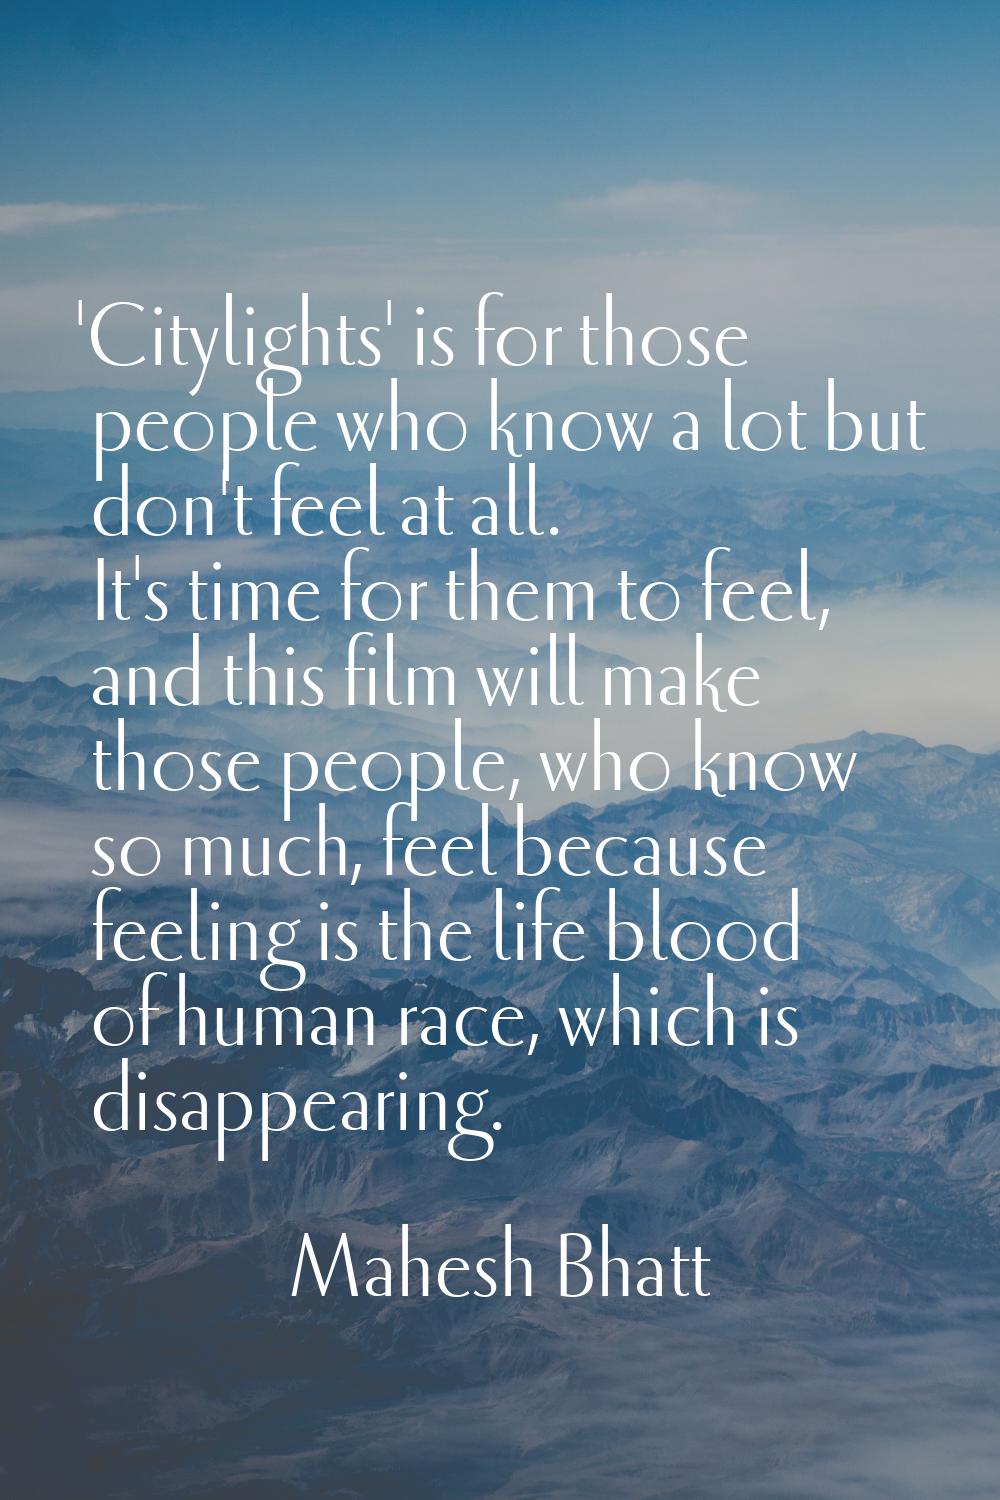 'Citylights' is for those people who know a lot but don't feel at all. It's time for them to feel, 